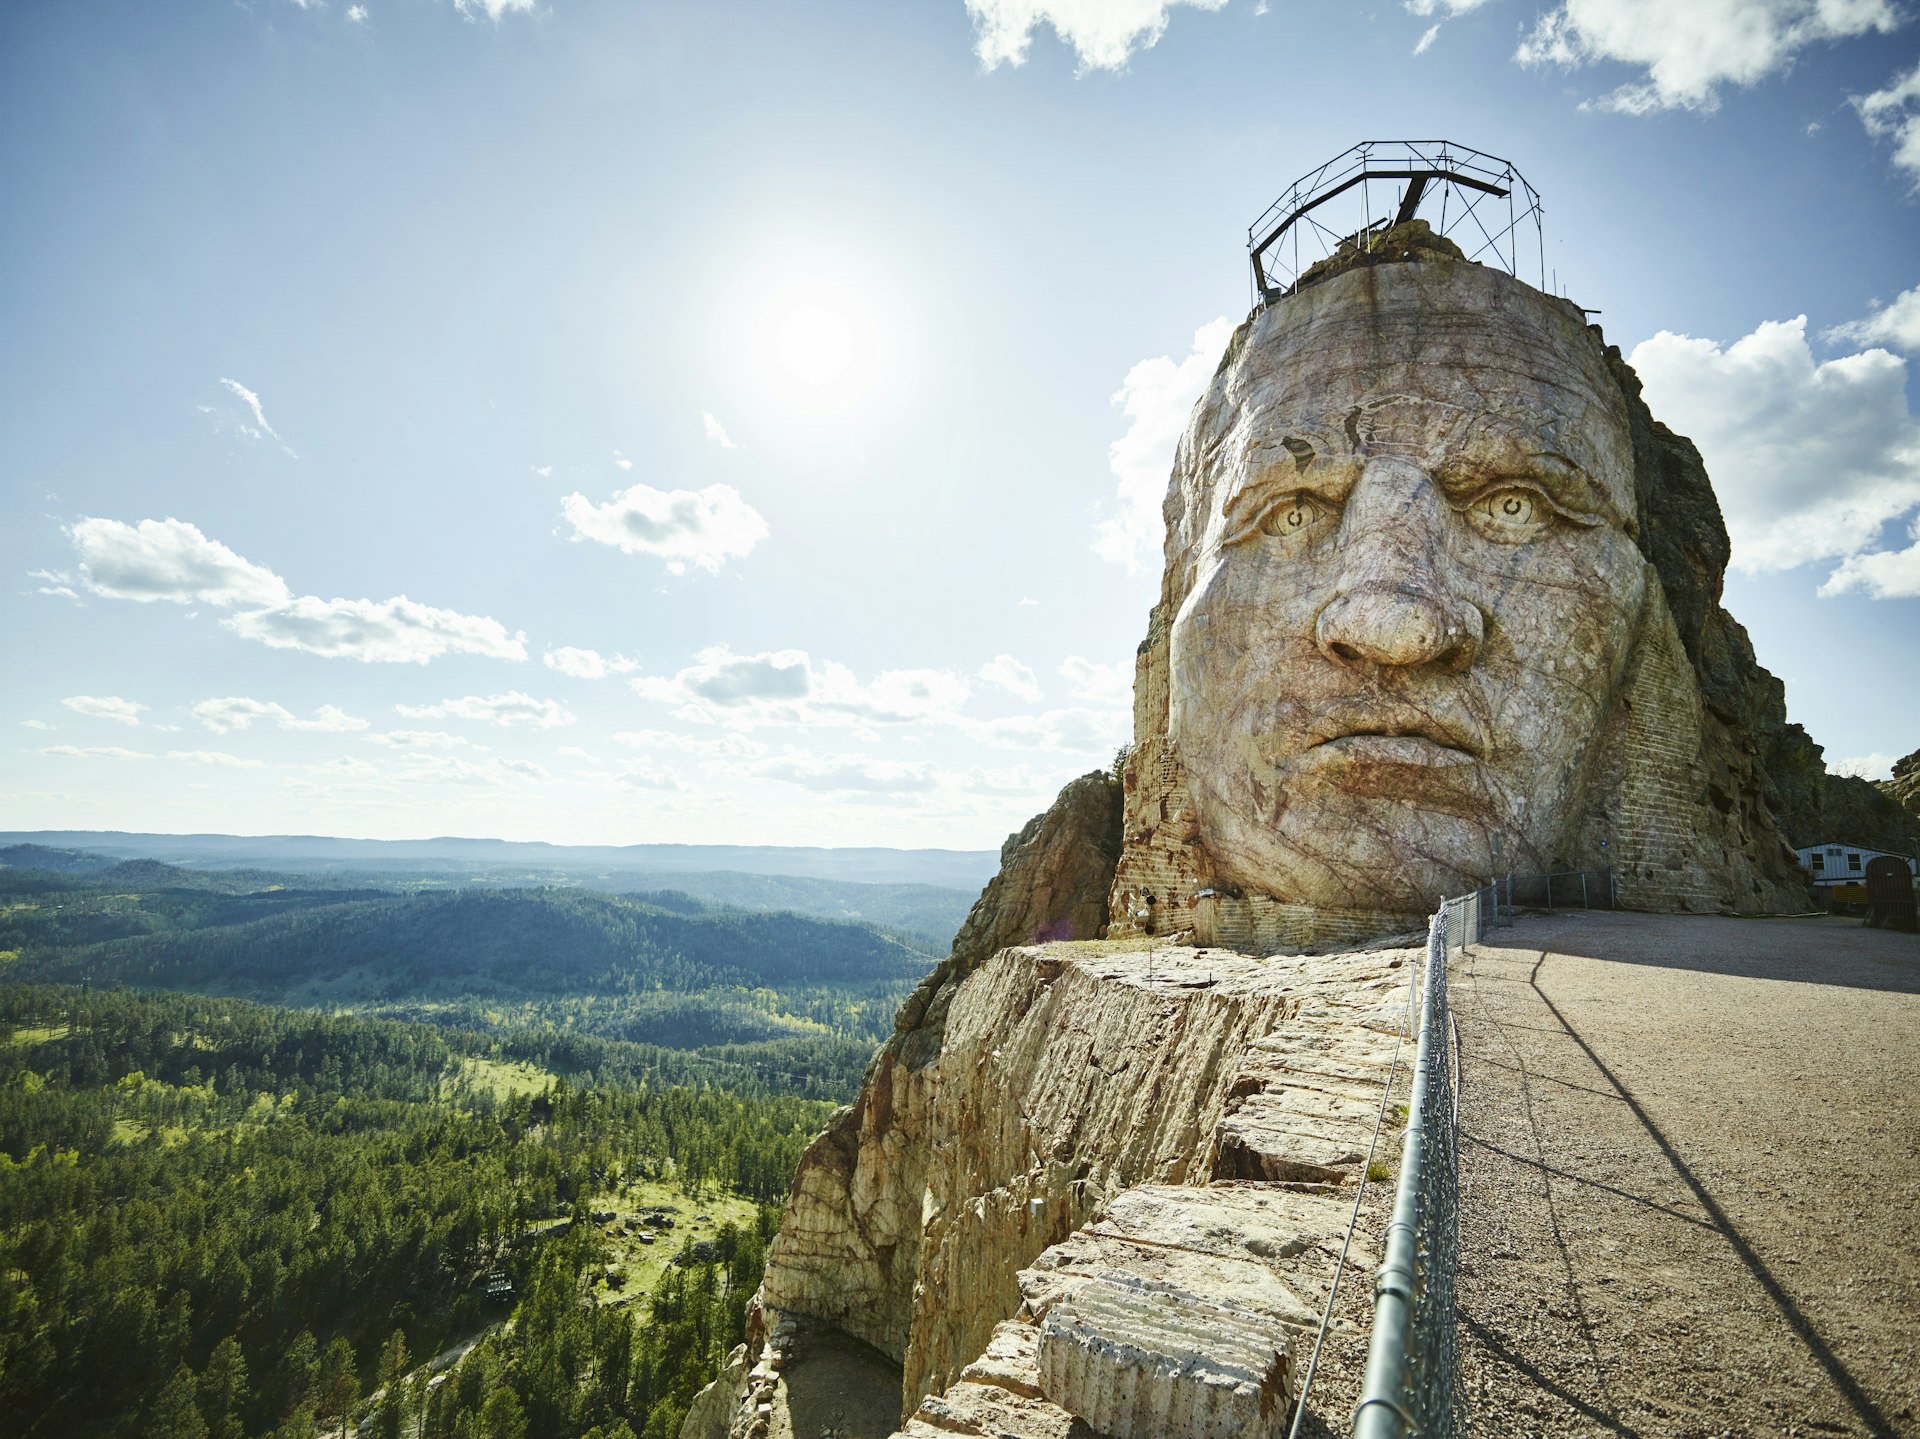 A huge stone sculpture of a head and face on a hill